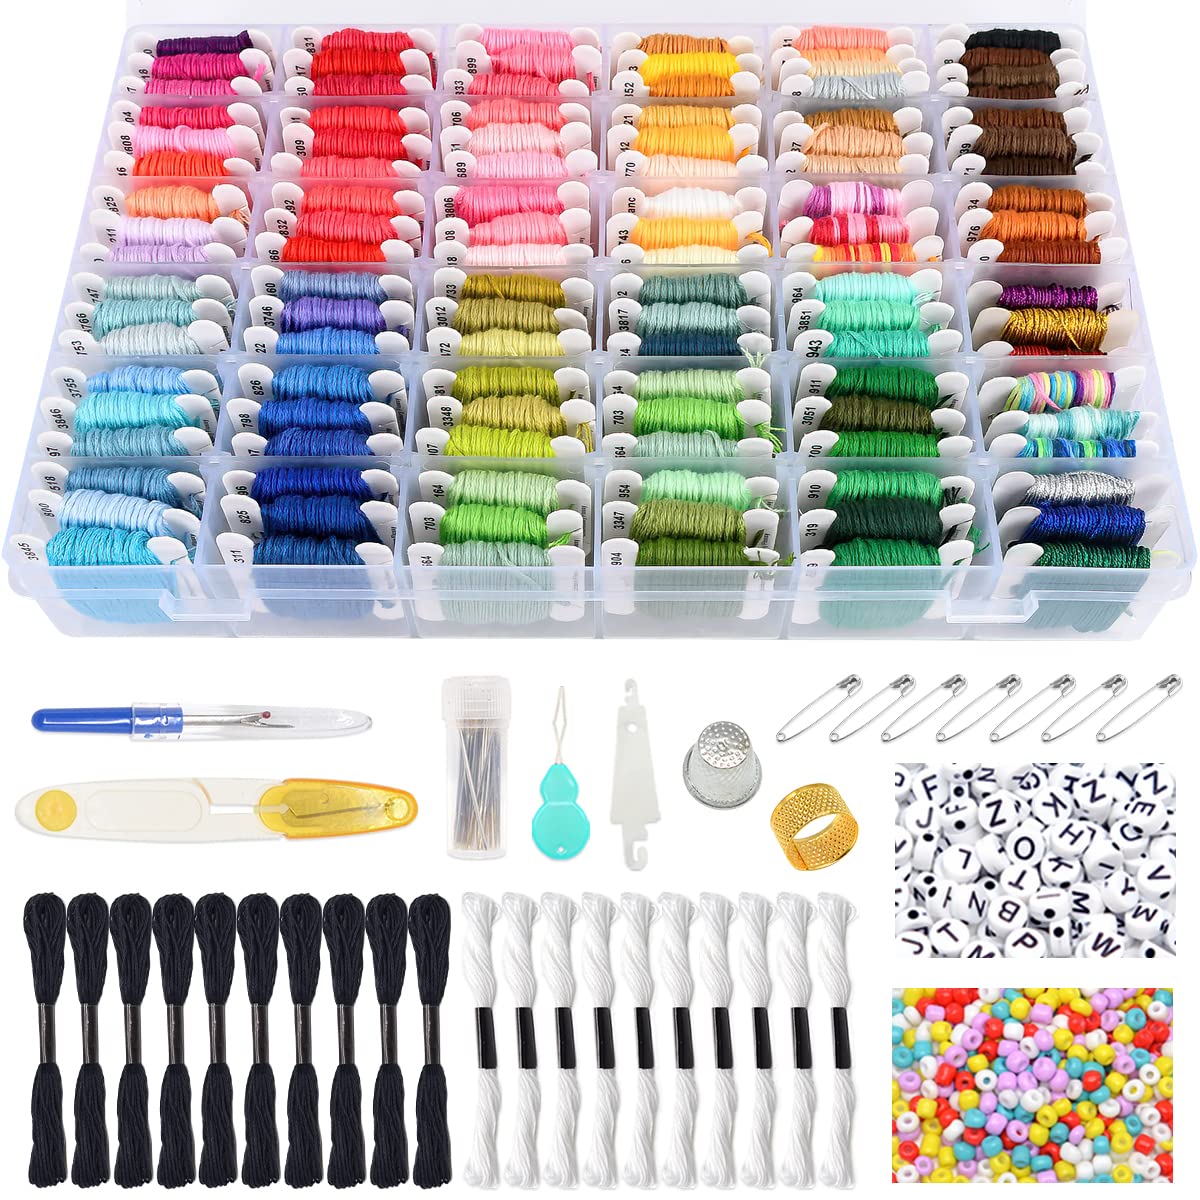 Embroidery String Kits,Cross Stitch Tools Kit,Punch Needle Embroidery  Kit,Perfect for Making Friendship Bracelet Strings,Includes 108 Colors  Thread and 800 Beads - Walmart.com